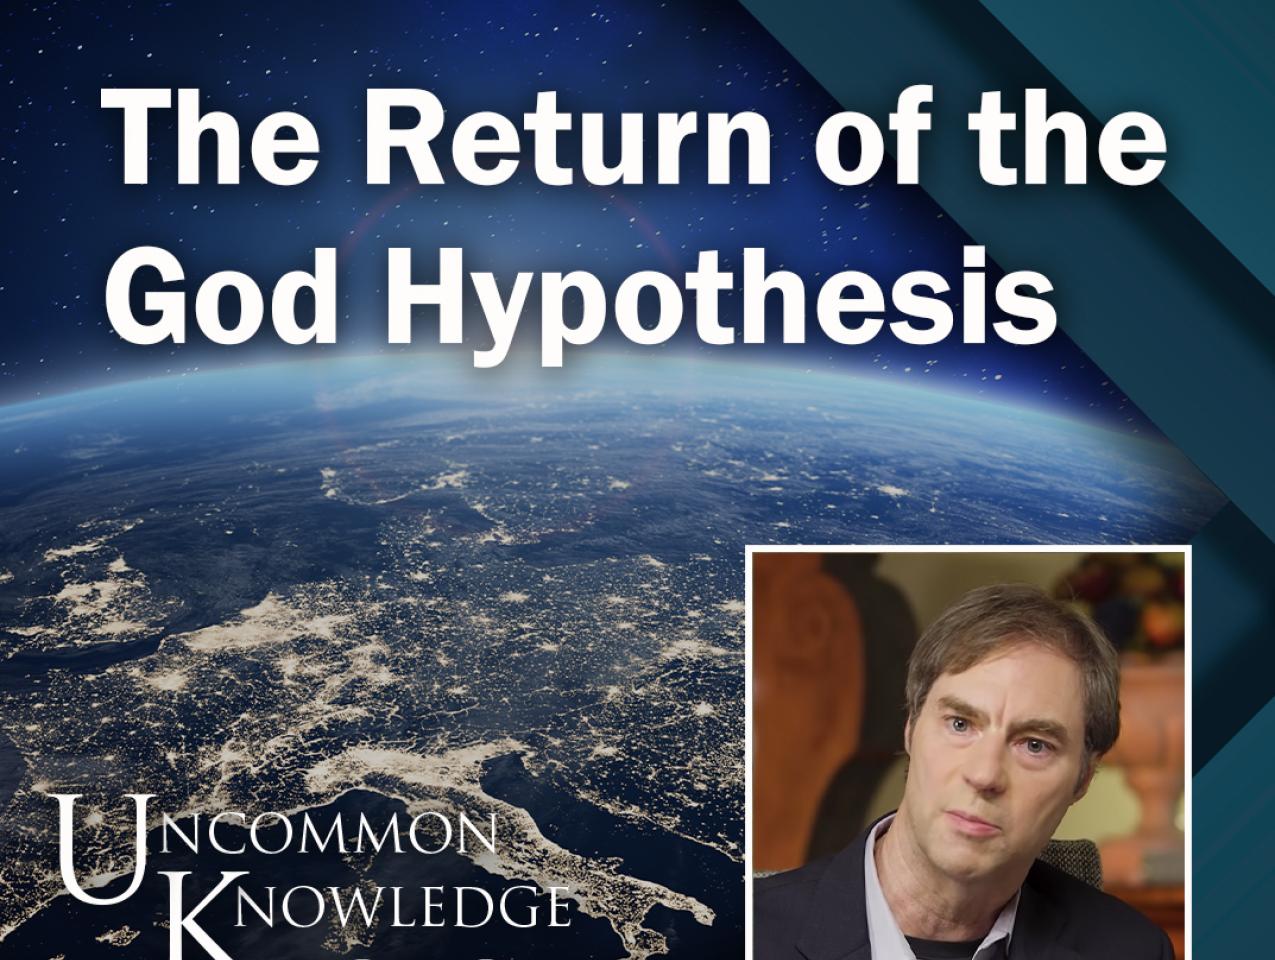 Stephen Meyer On Intelligent Design And The Return Of The God Hypothesis |  Hoover Institution Stephen Meyer On Intelligent Design And The Return Of  The God Hypothesis